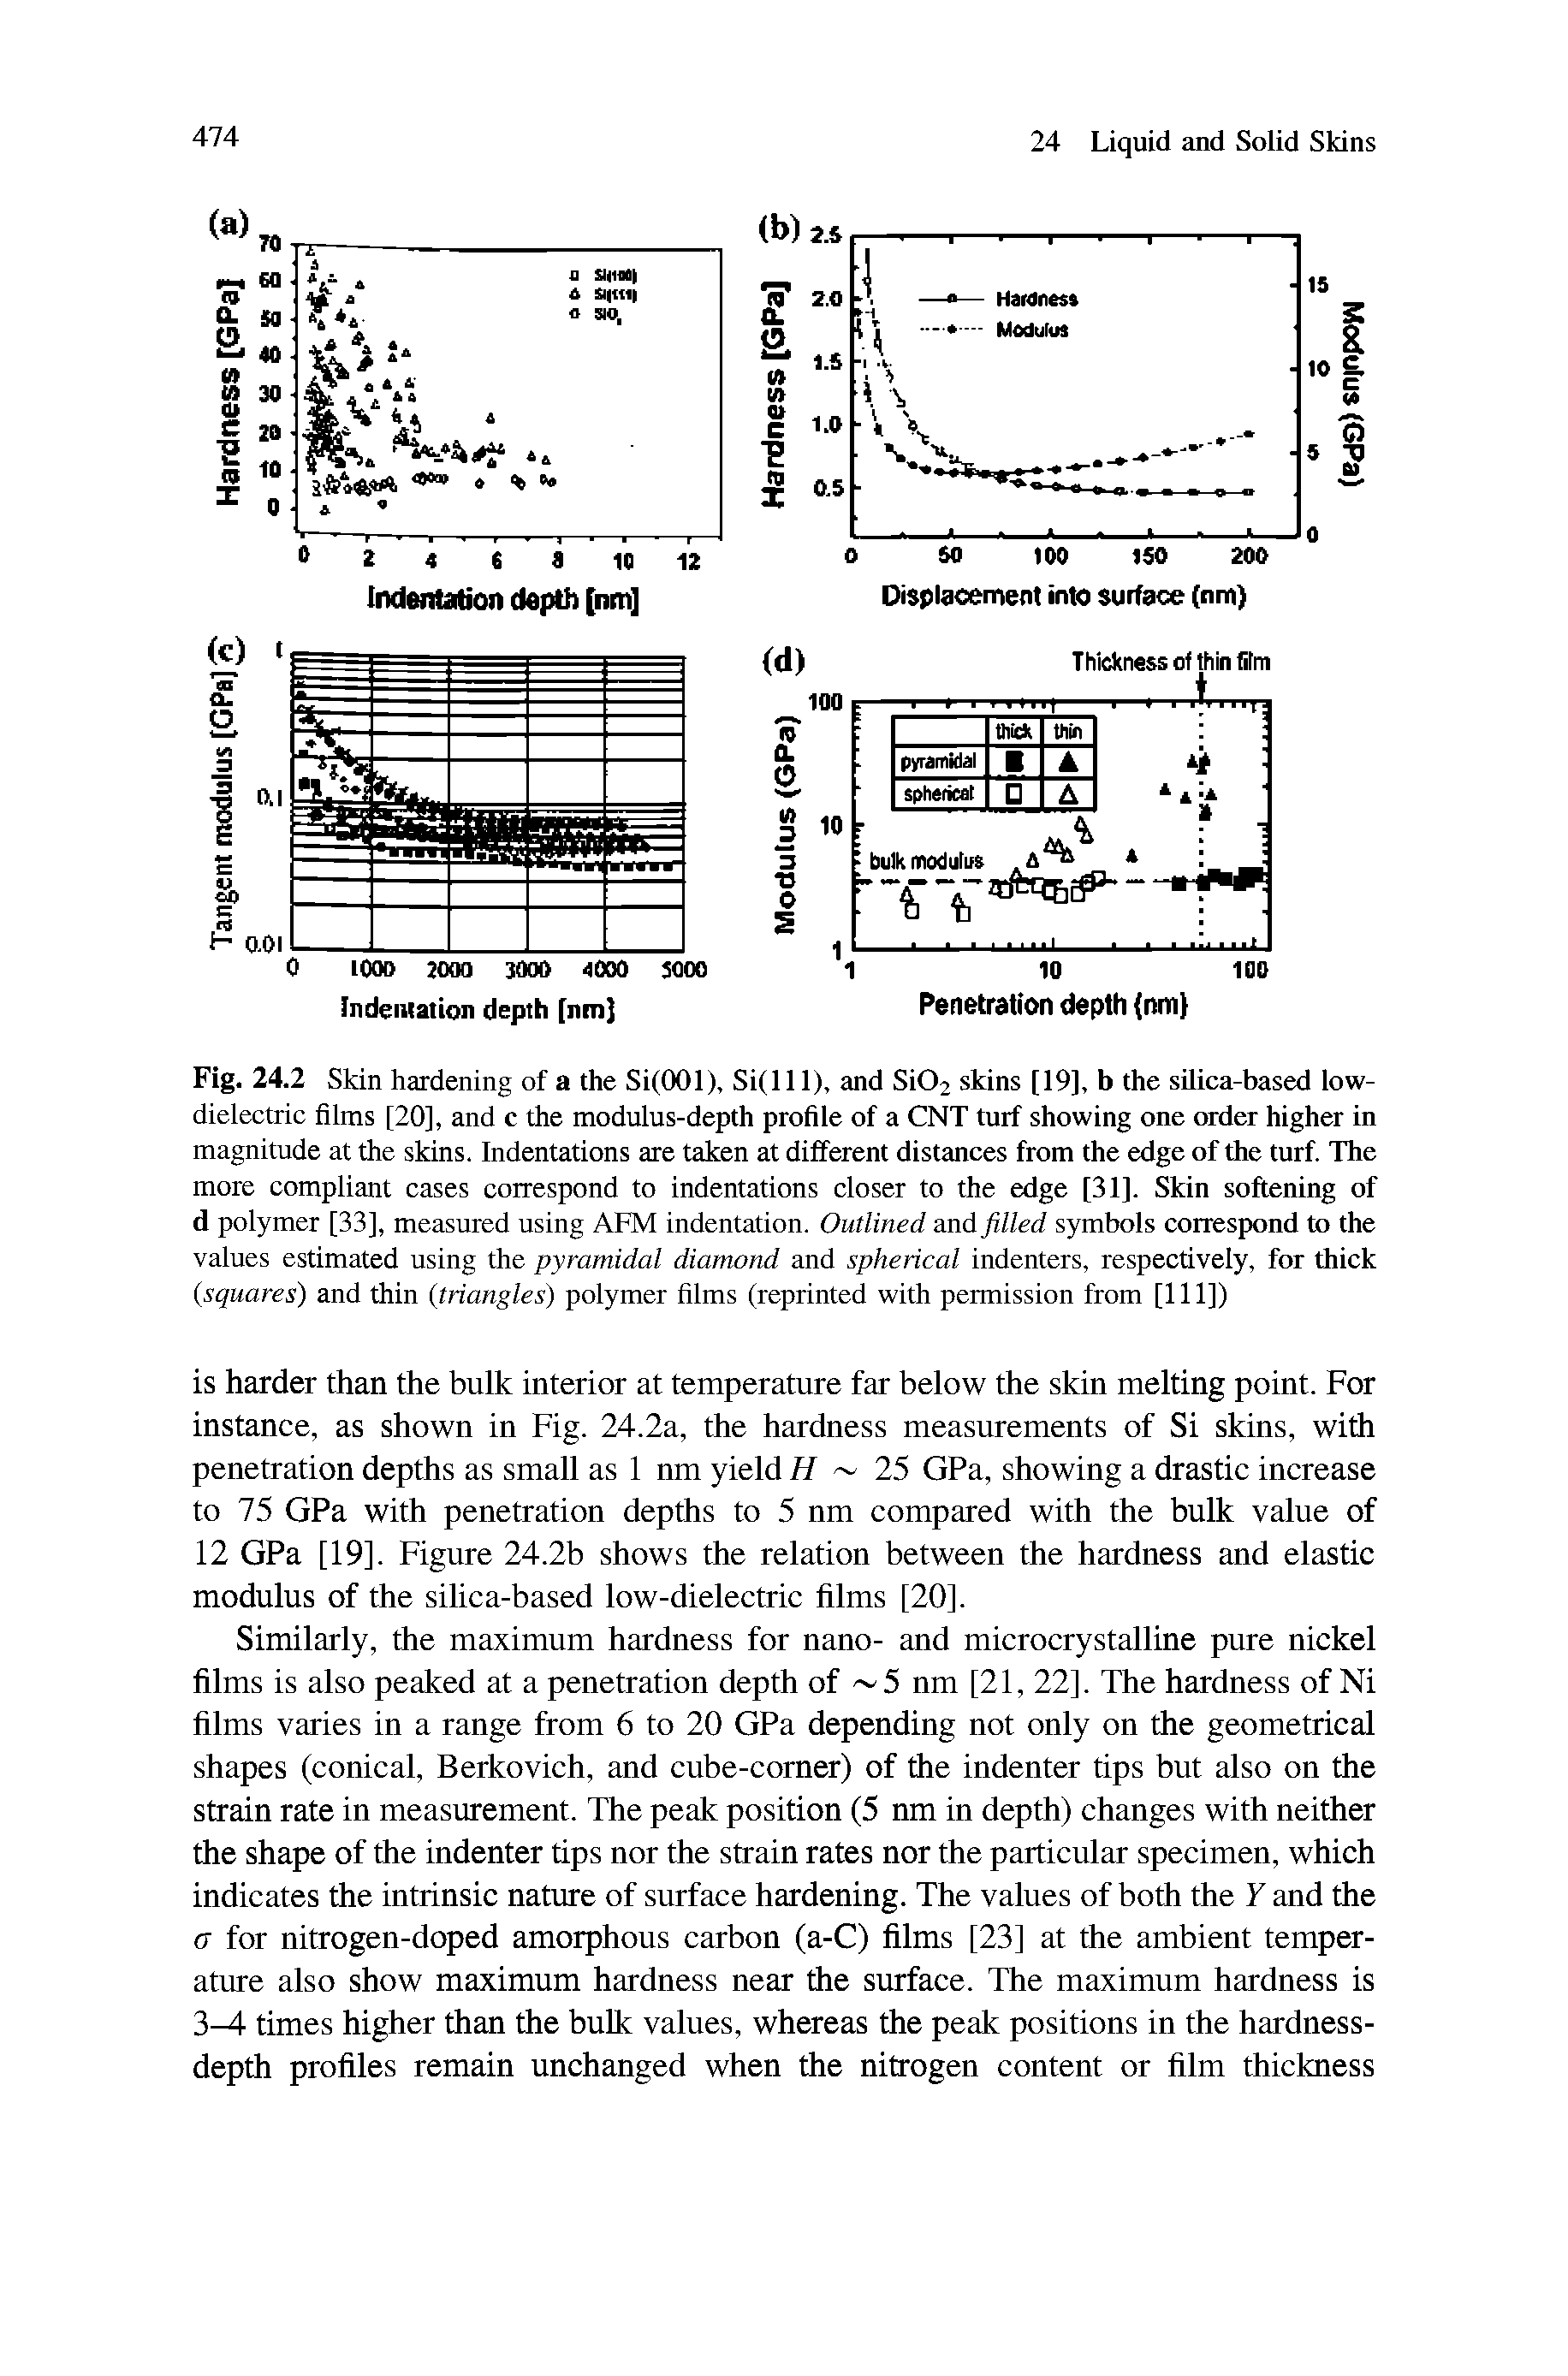 Fig. 24.2 Skin hardening of a the Si(OOl), Si(l 11), and Si02 skins [19], b the silica-based low-dielectric films [20], and c the modulus-depth profile of a CNT turf showing one order higher in magnitude at the skins. Indentations are taken at different distances from the edge of the turf. The more compliant cases correspond to indentations closer to the edge [31]. Skin softening of d polymer [33], measured using AFM indentation. Outlined and filled symbols correspond to the values estimated using the pyramidal diamond and spherical indenters, respectively, for thick (squares) and thin (triangles) polymer films (reprinted with permission from [111])...